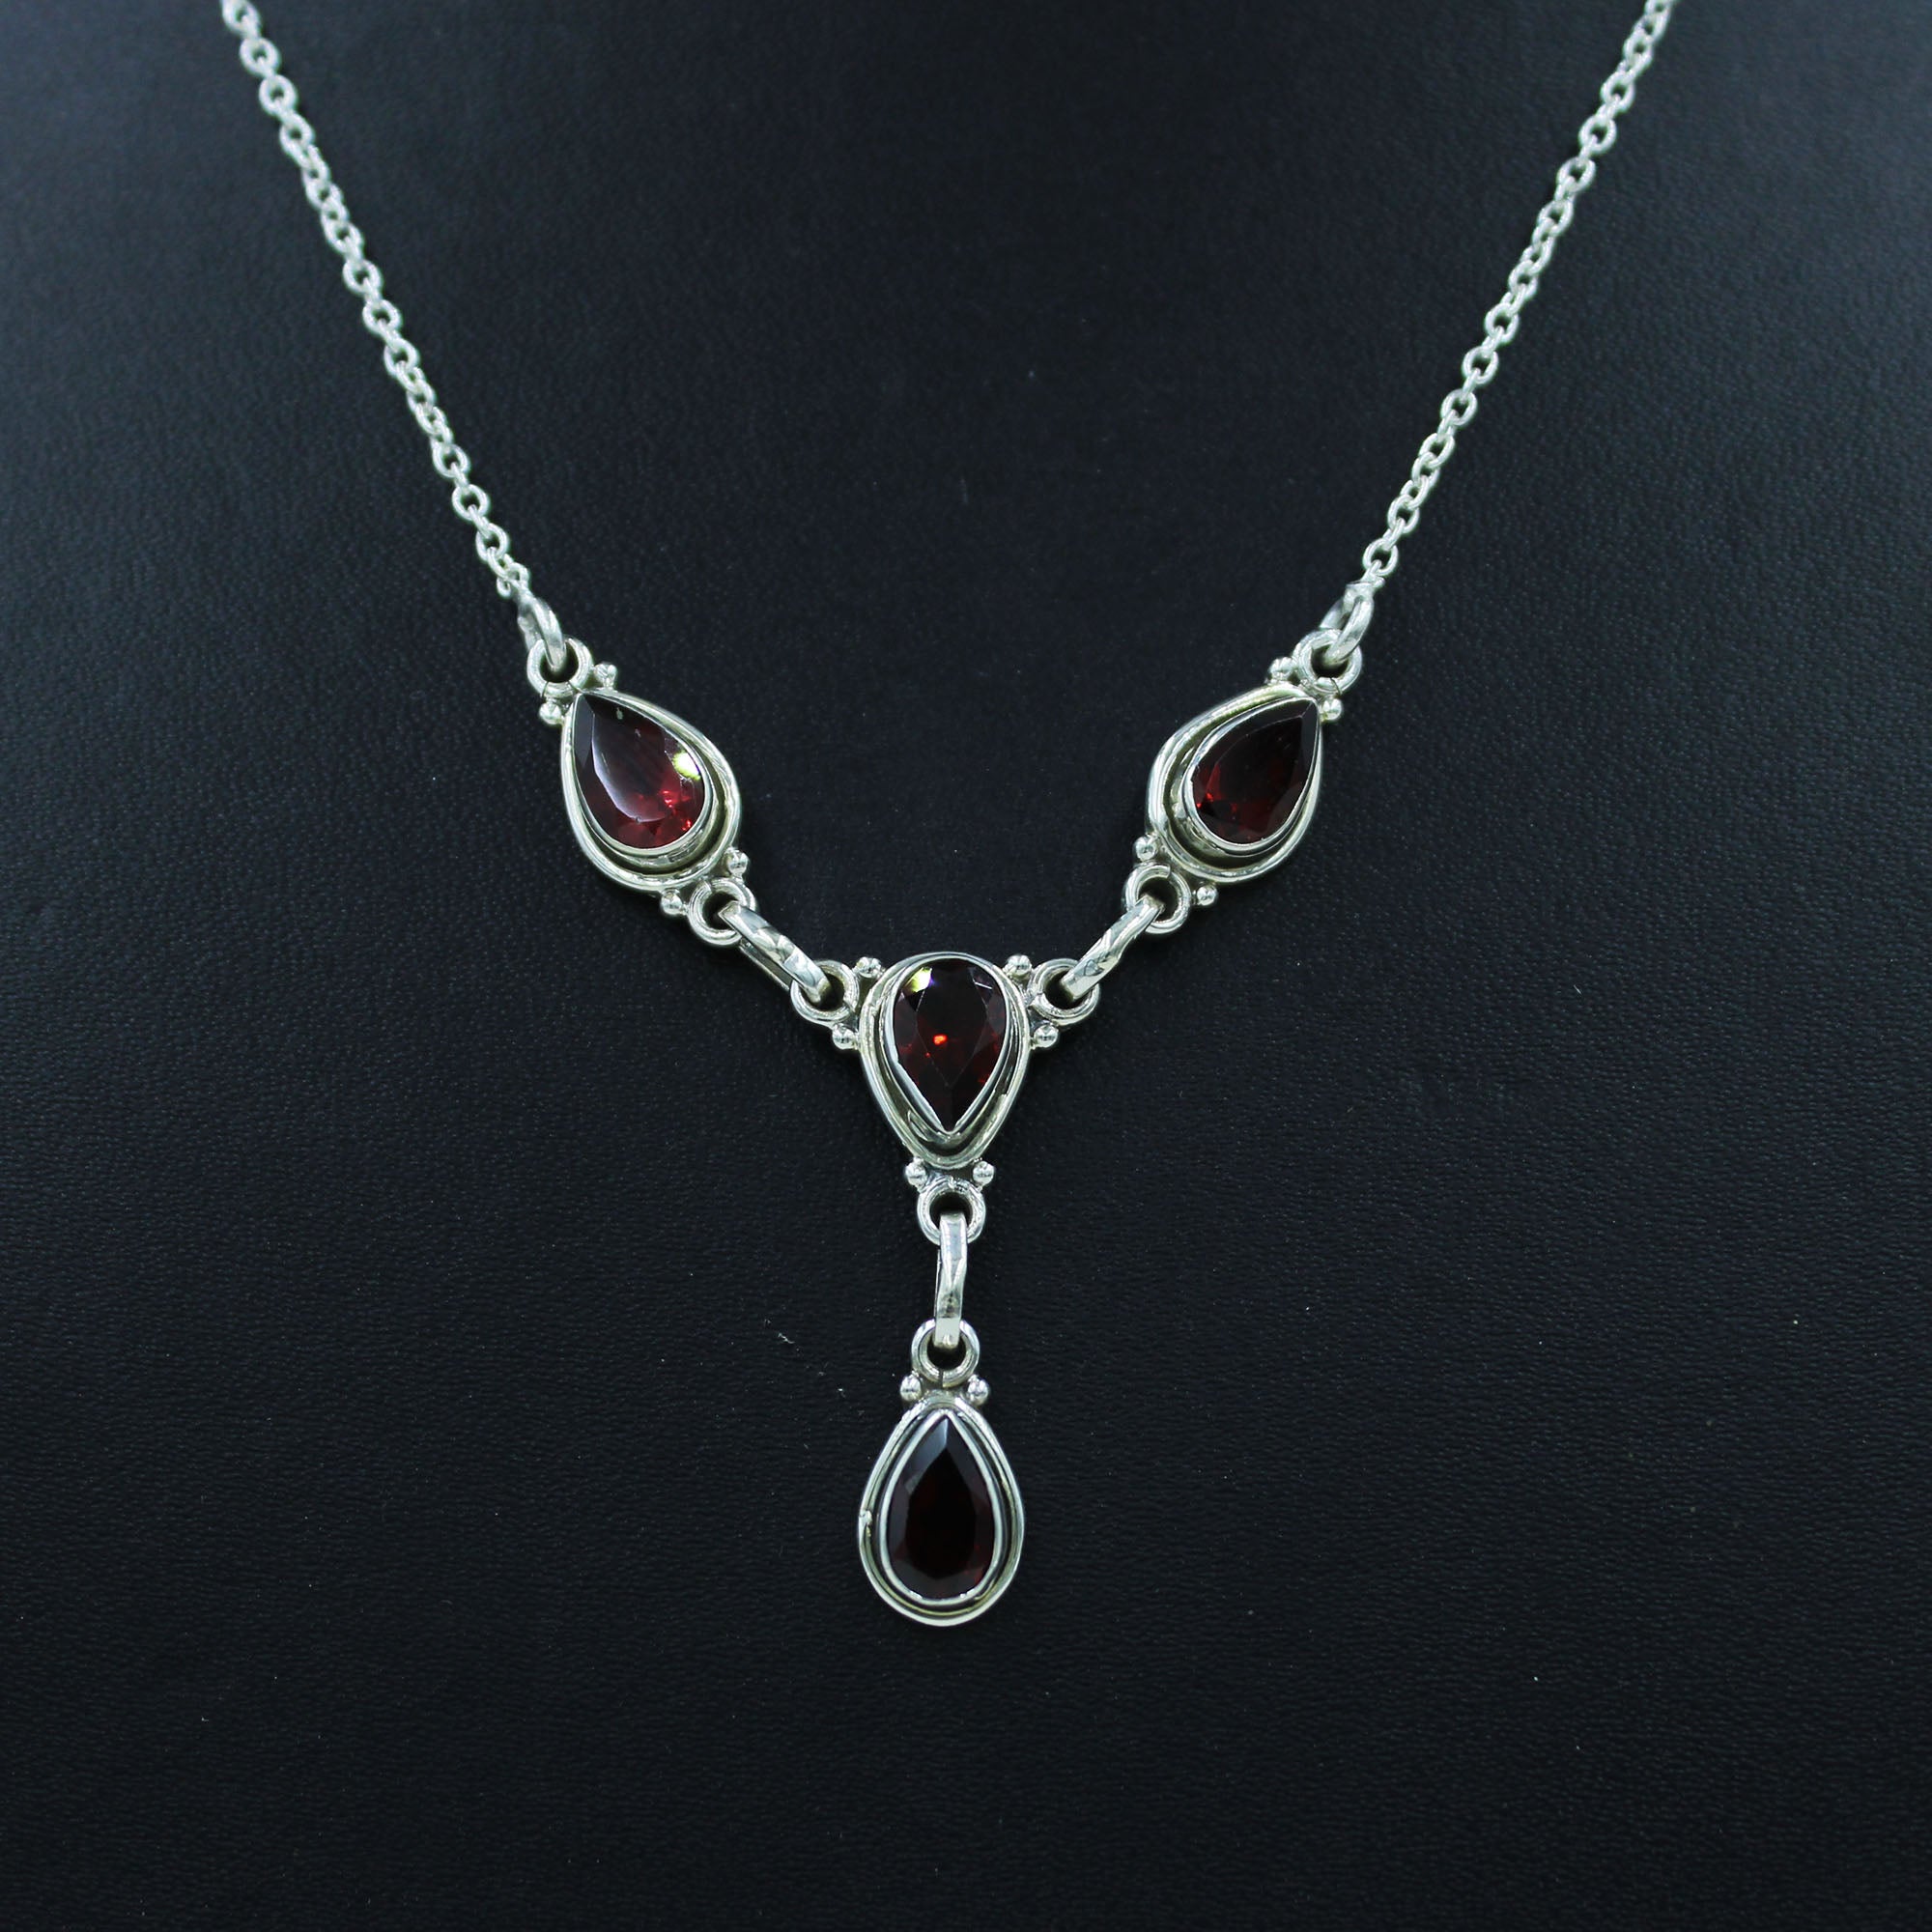 Natural Garnet Delightful Jewelry Necklace in Sterling Silver